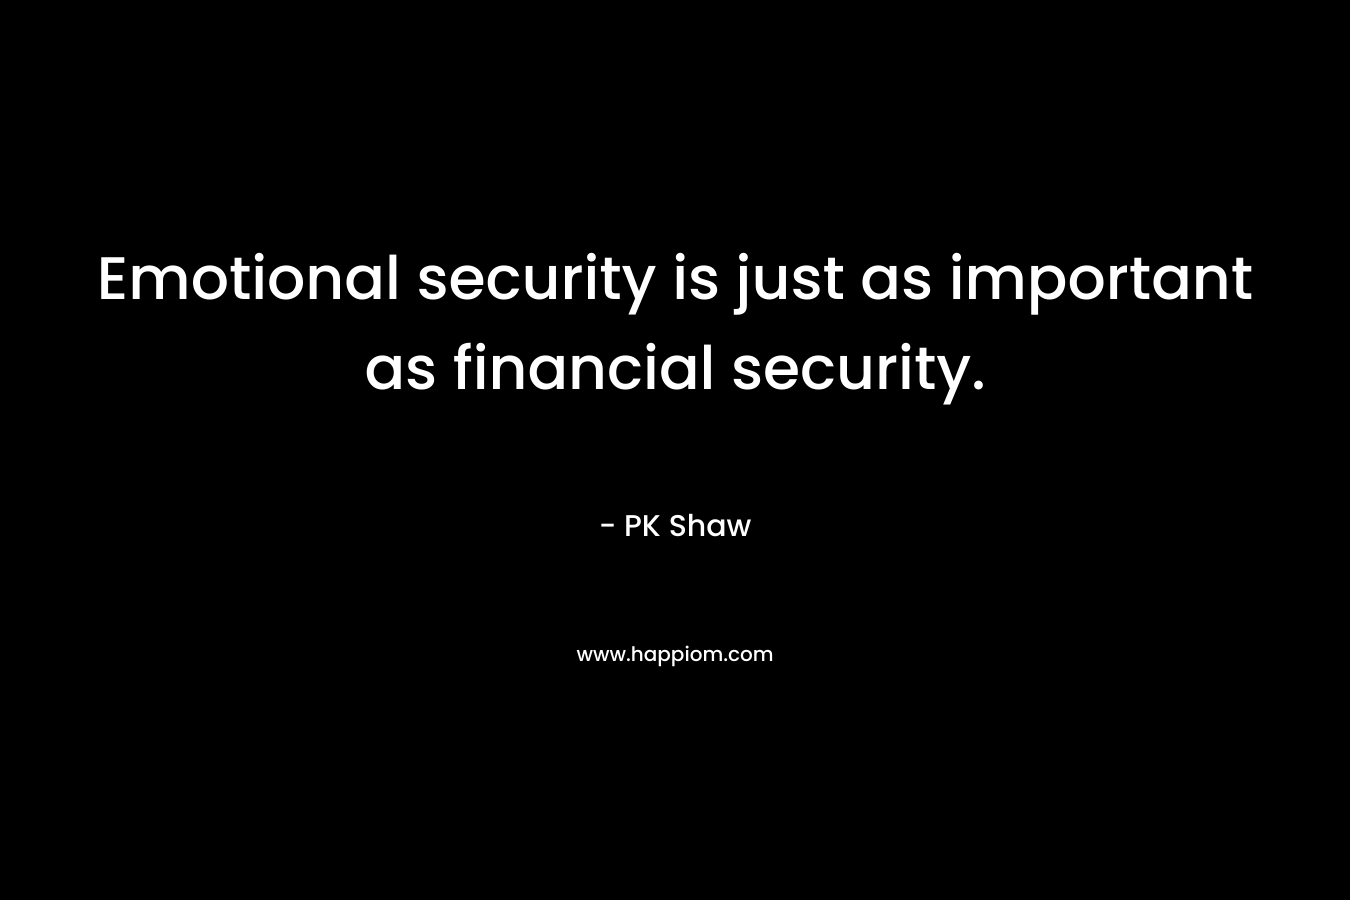 Emotional security is just as important as financial security.